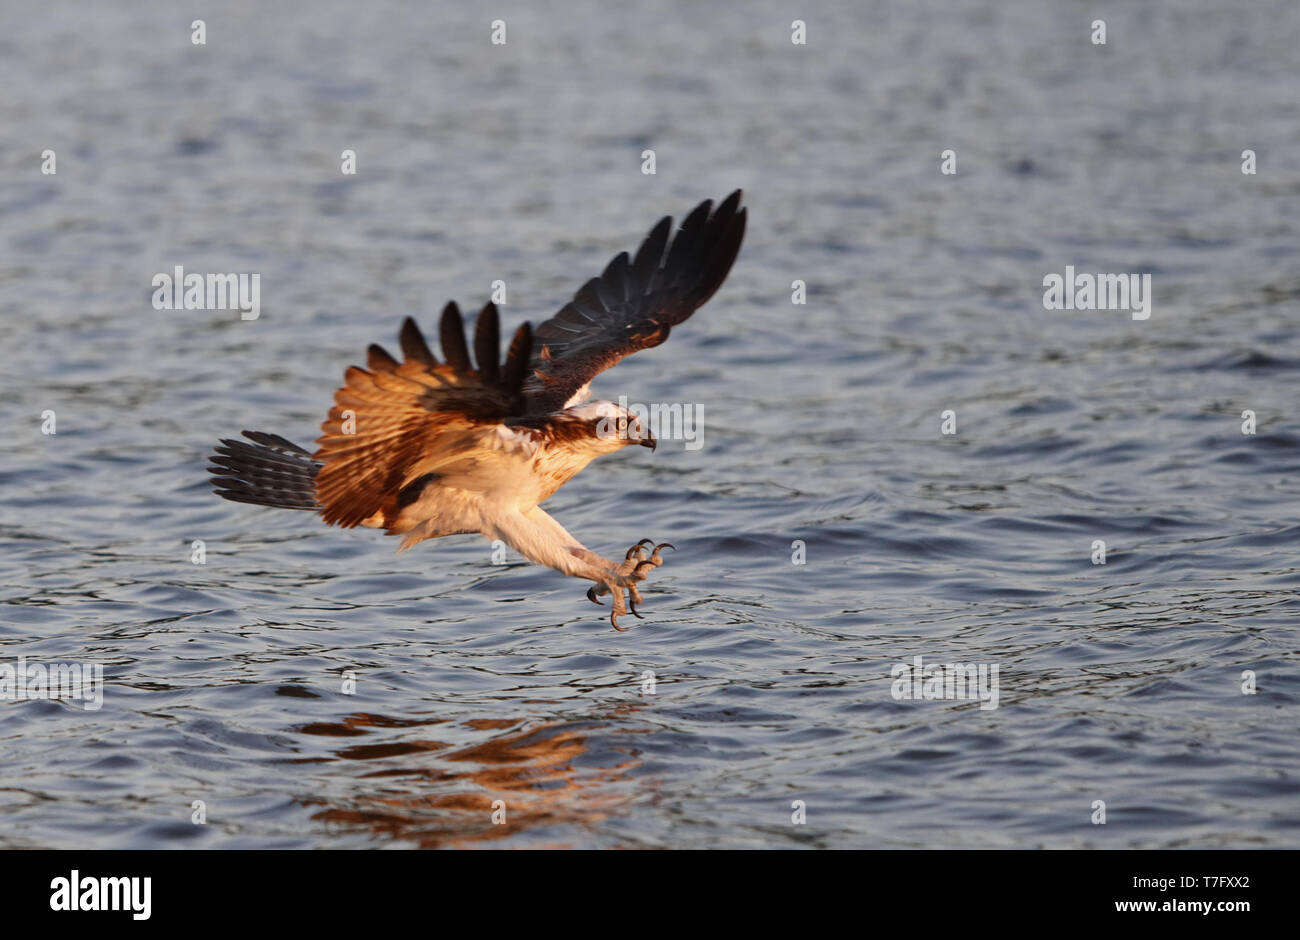 https://c8.alamy.com/comp/T7FXX2/osprey-pandion-haliaetus-adult-fishing-at-lake-mlaren-sweden-with-talons-stretched-out-to-catch-a-fish-T7FXX2.jpg